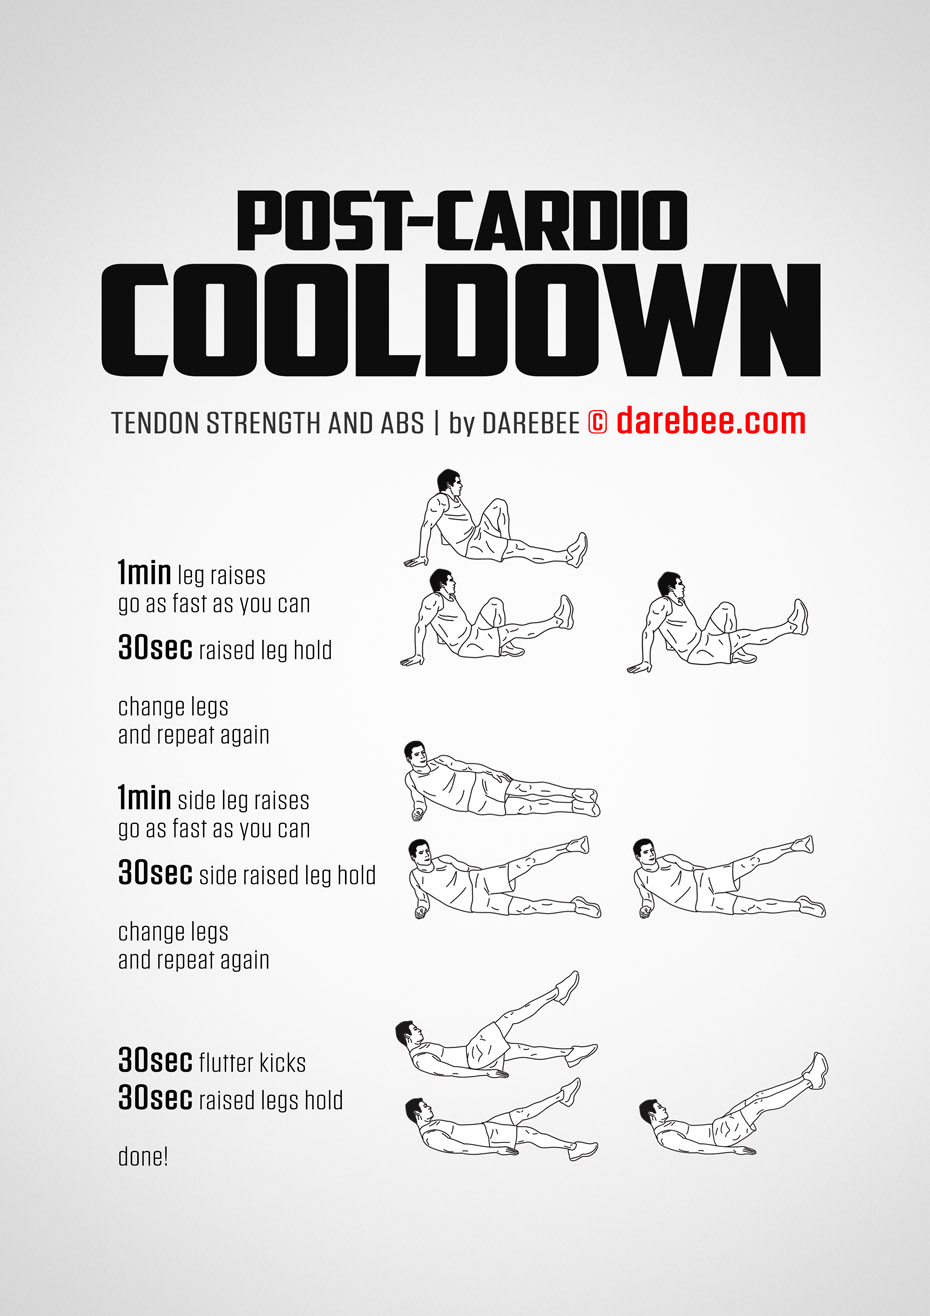 list of cool down exercises